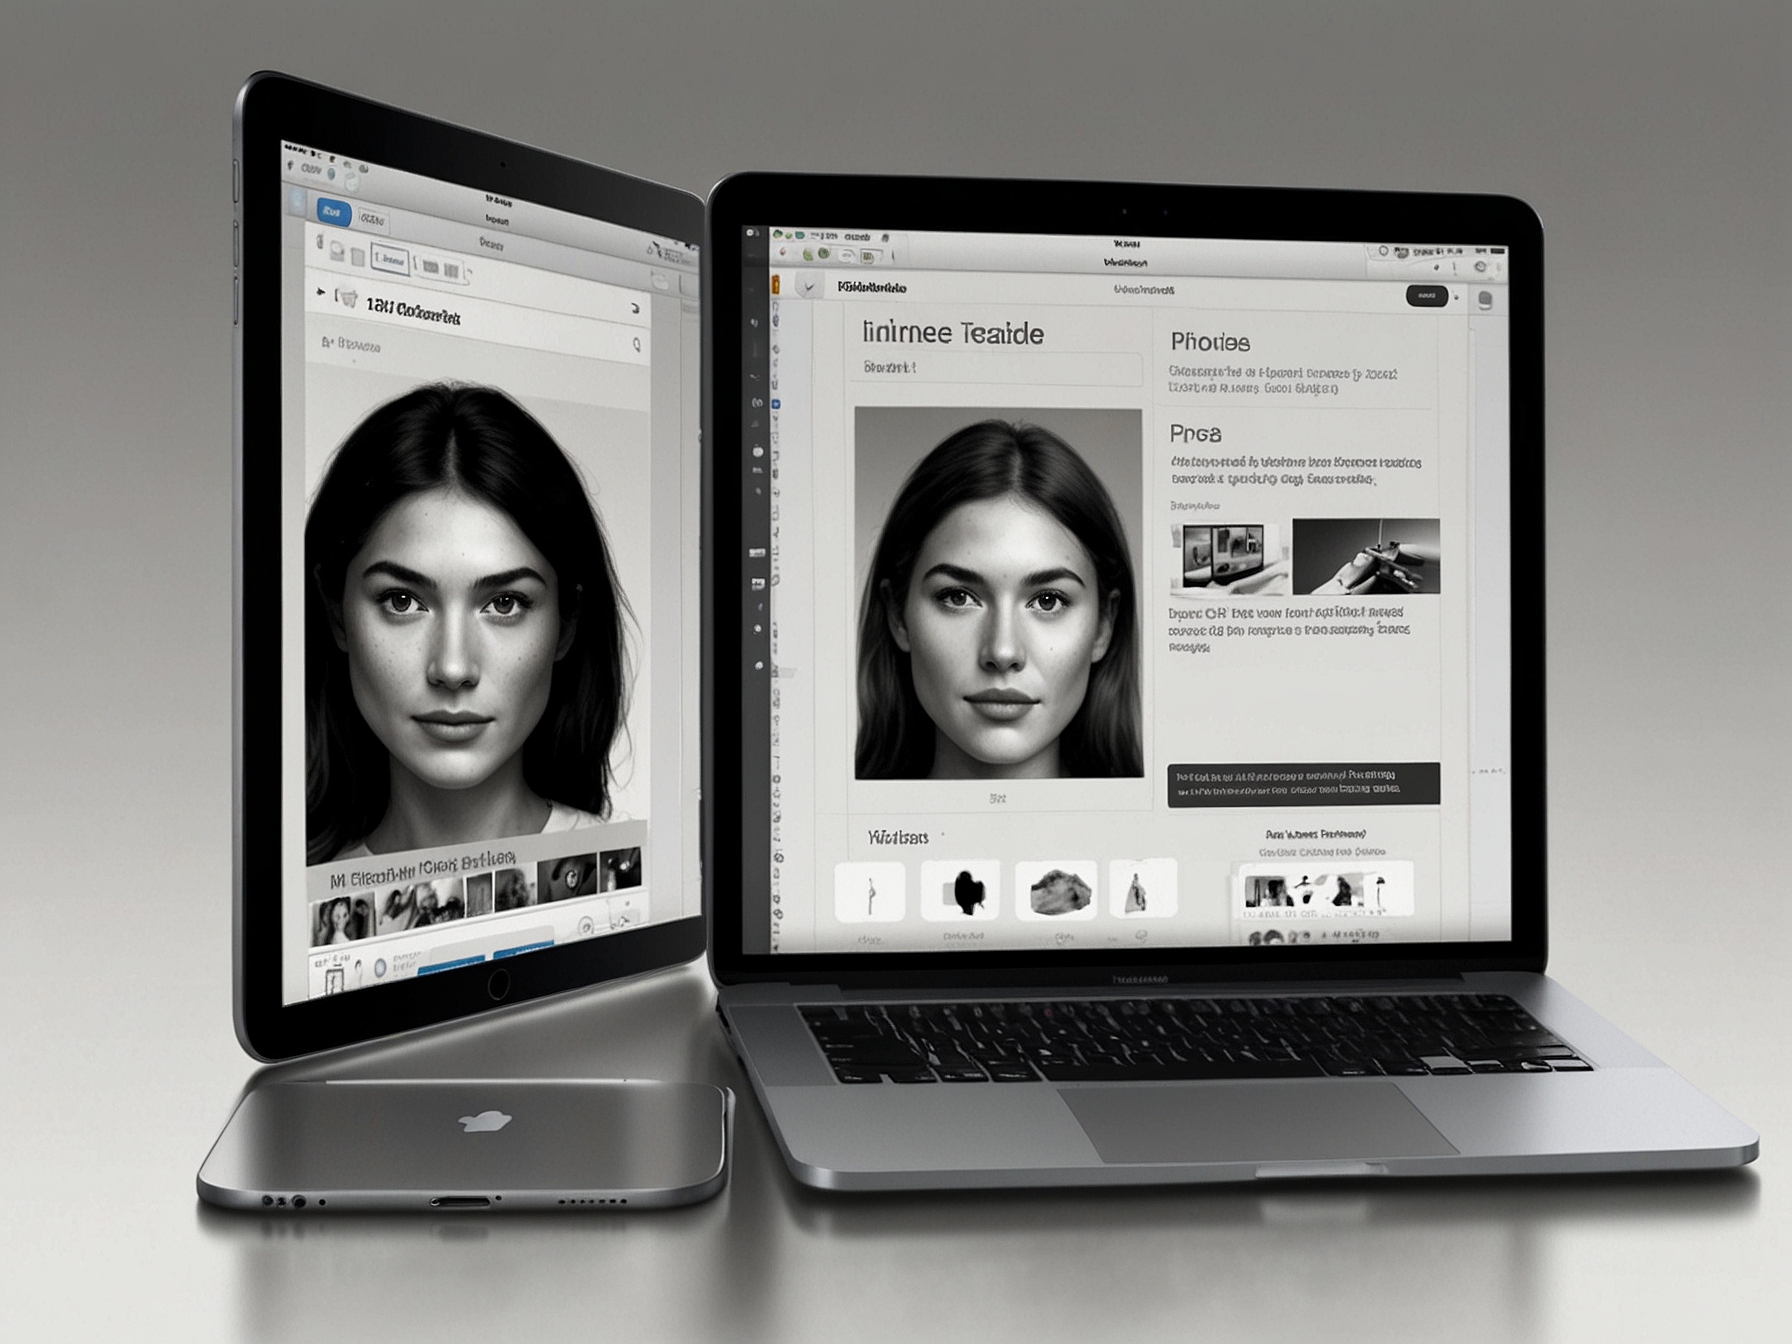 An iPhone screen mirrored onto a MacBook and iPad, showcasing the new iPhone Screen Mirroring feature that allows integration and dual display functionalities across Apple devices.